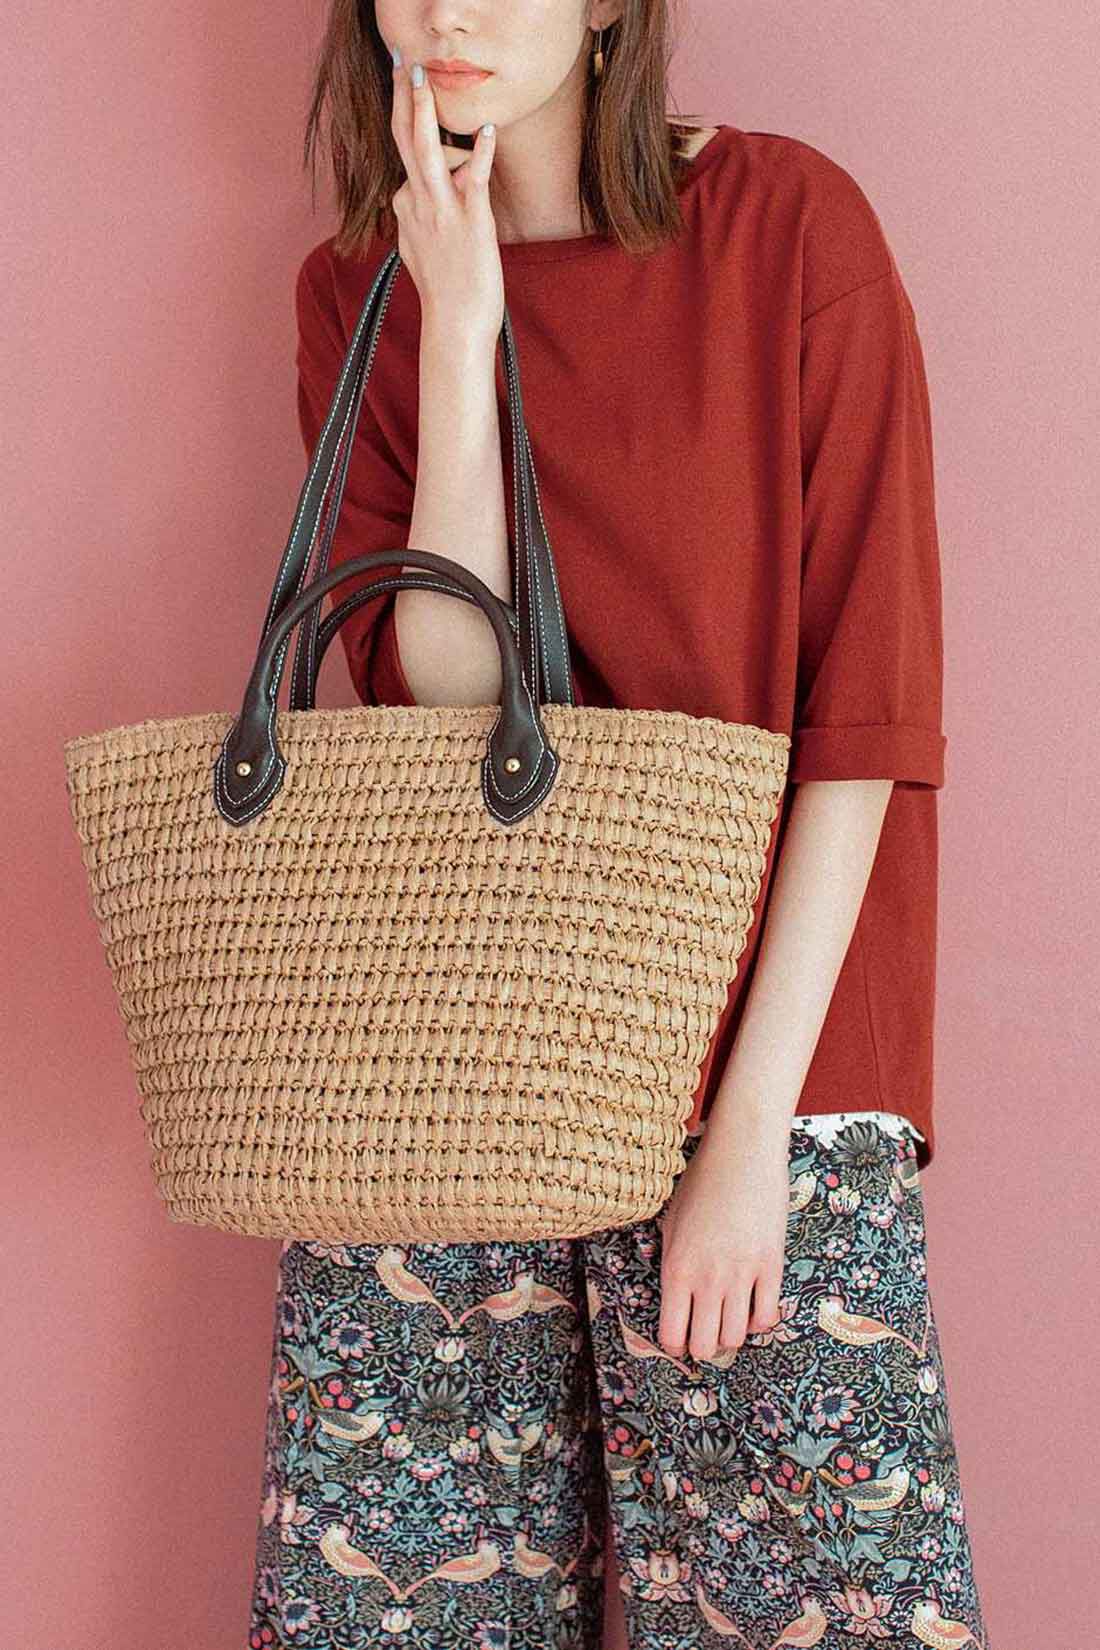 French Market Bag アンティーク カゴ マルシェ バッグ - かごバッグ